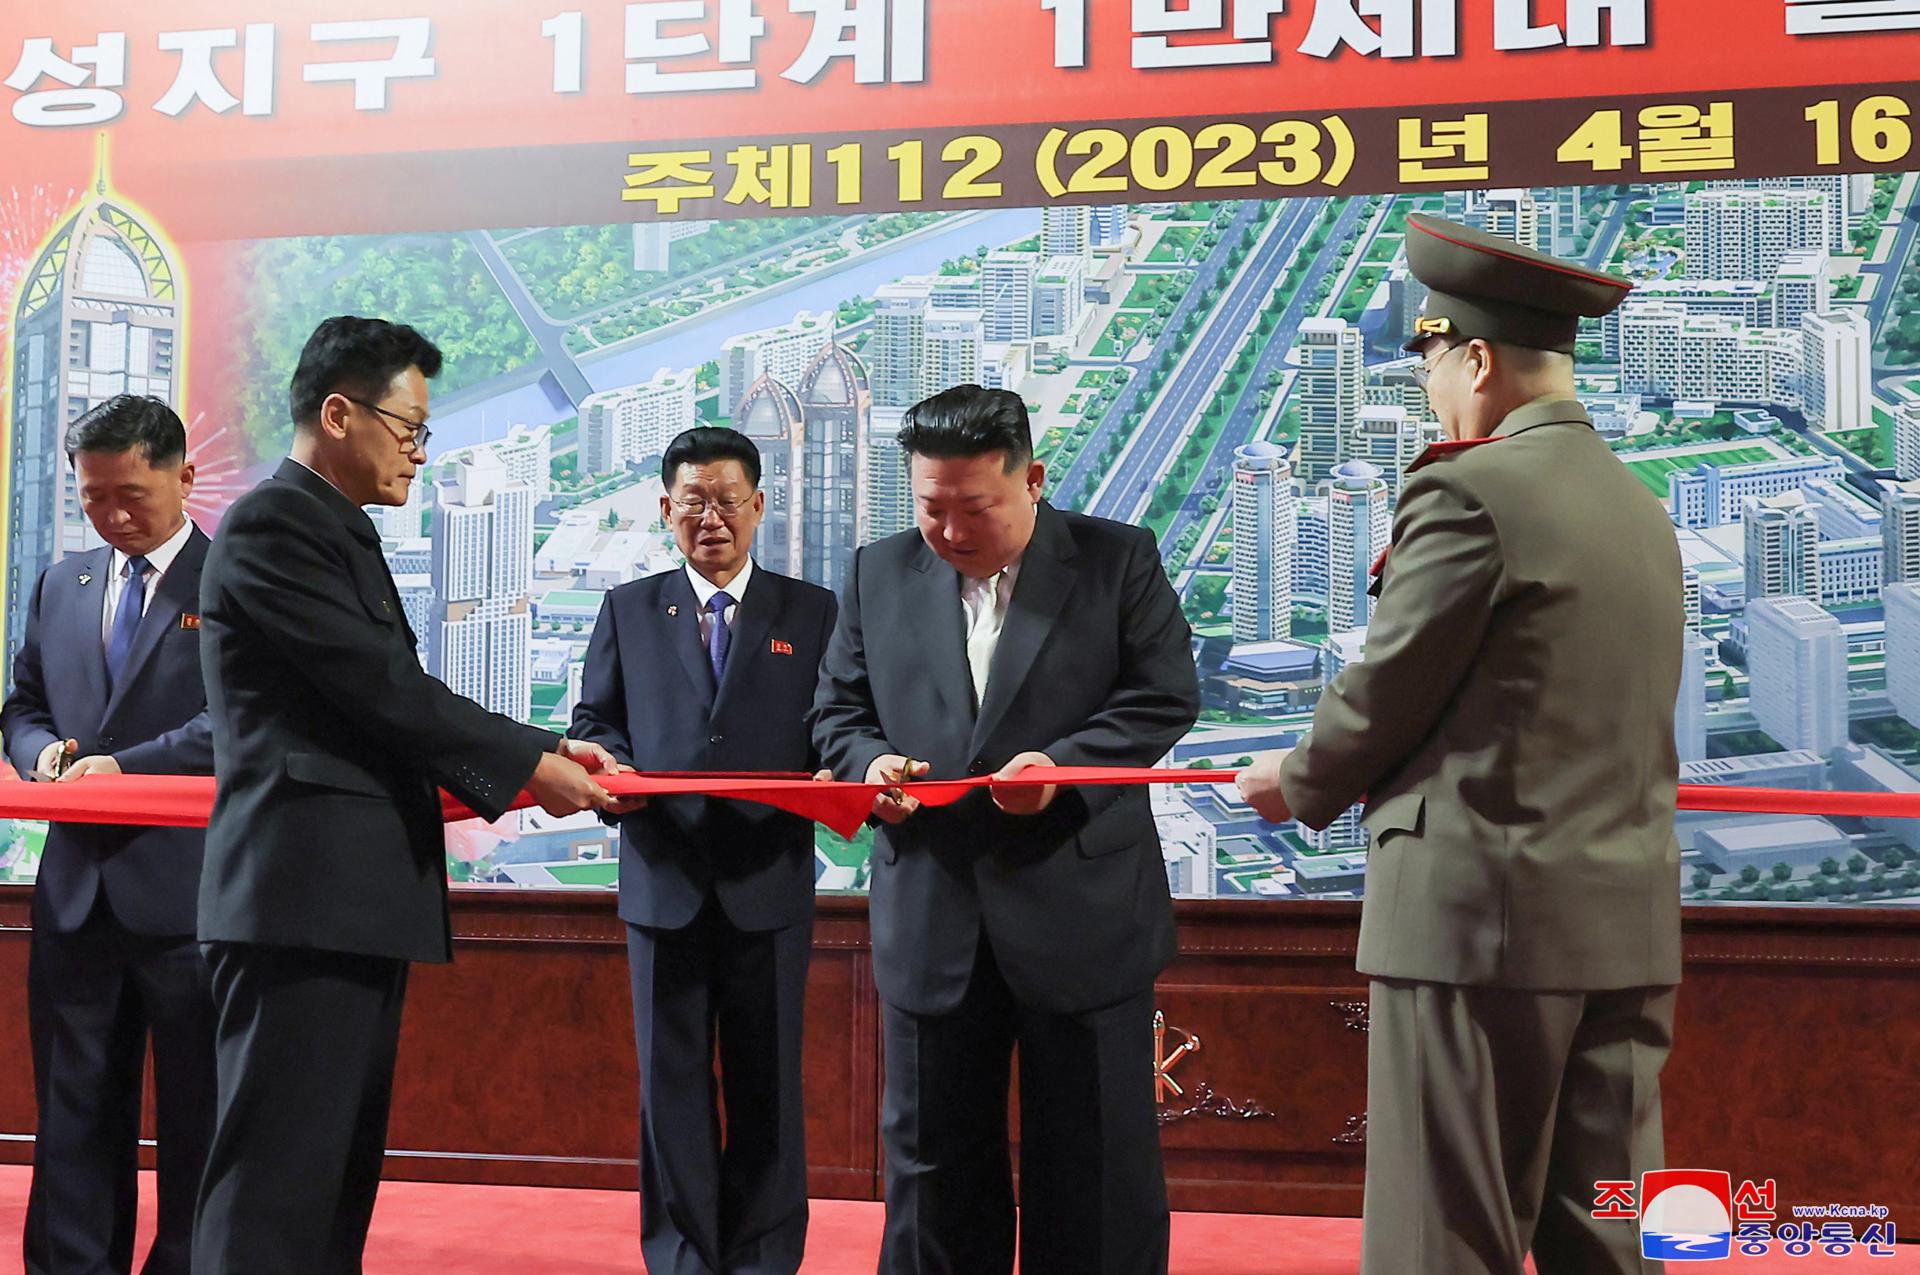 A photo released by the official North Korean Central News Agency (KCNA) shows North Korean leader Kim Jong Un (2-R) cutting the red ribbon during an inauguration ceremony for 10,000 new flats in the Hwasong area in Pyongyang, North Korea, 16 April 2023 (issued 17 April 2023). EFE/EPA/KCNA EDITORIAL USE ONLY